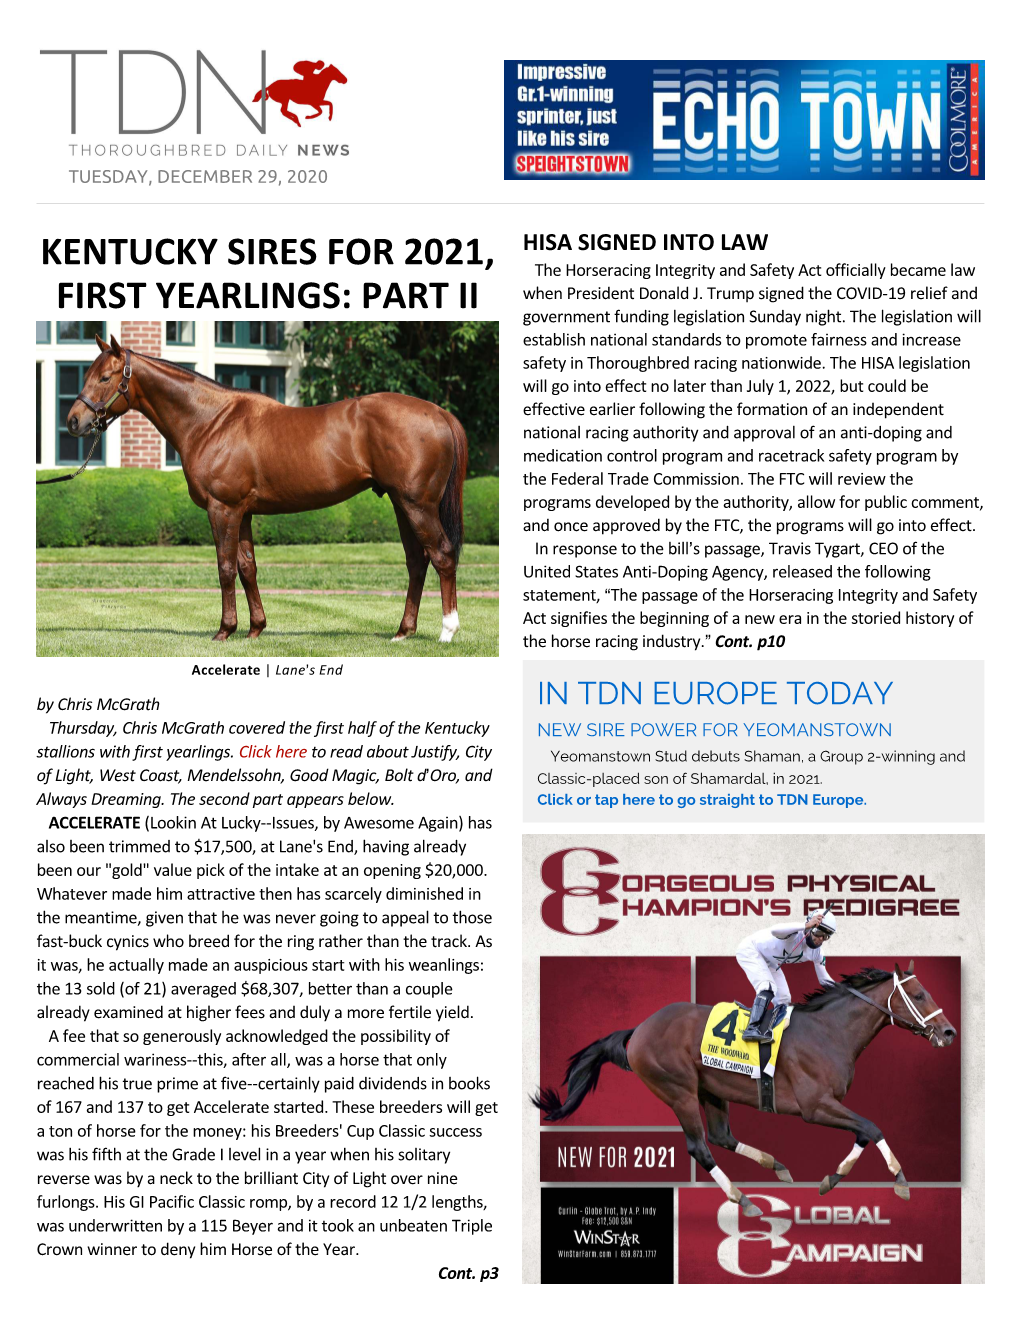 Kentucky Sires for 2021, First Yearlings: Part Ii